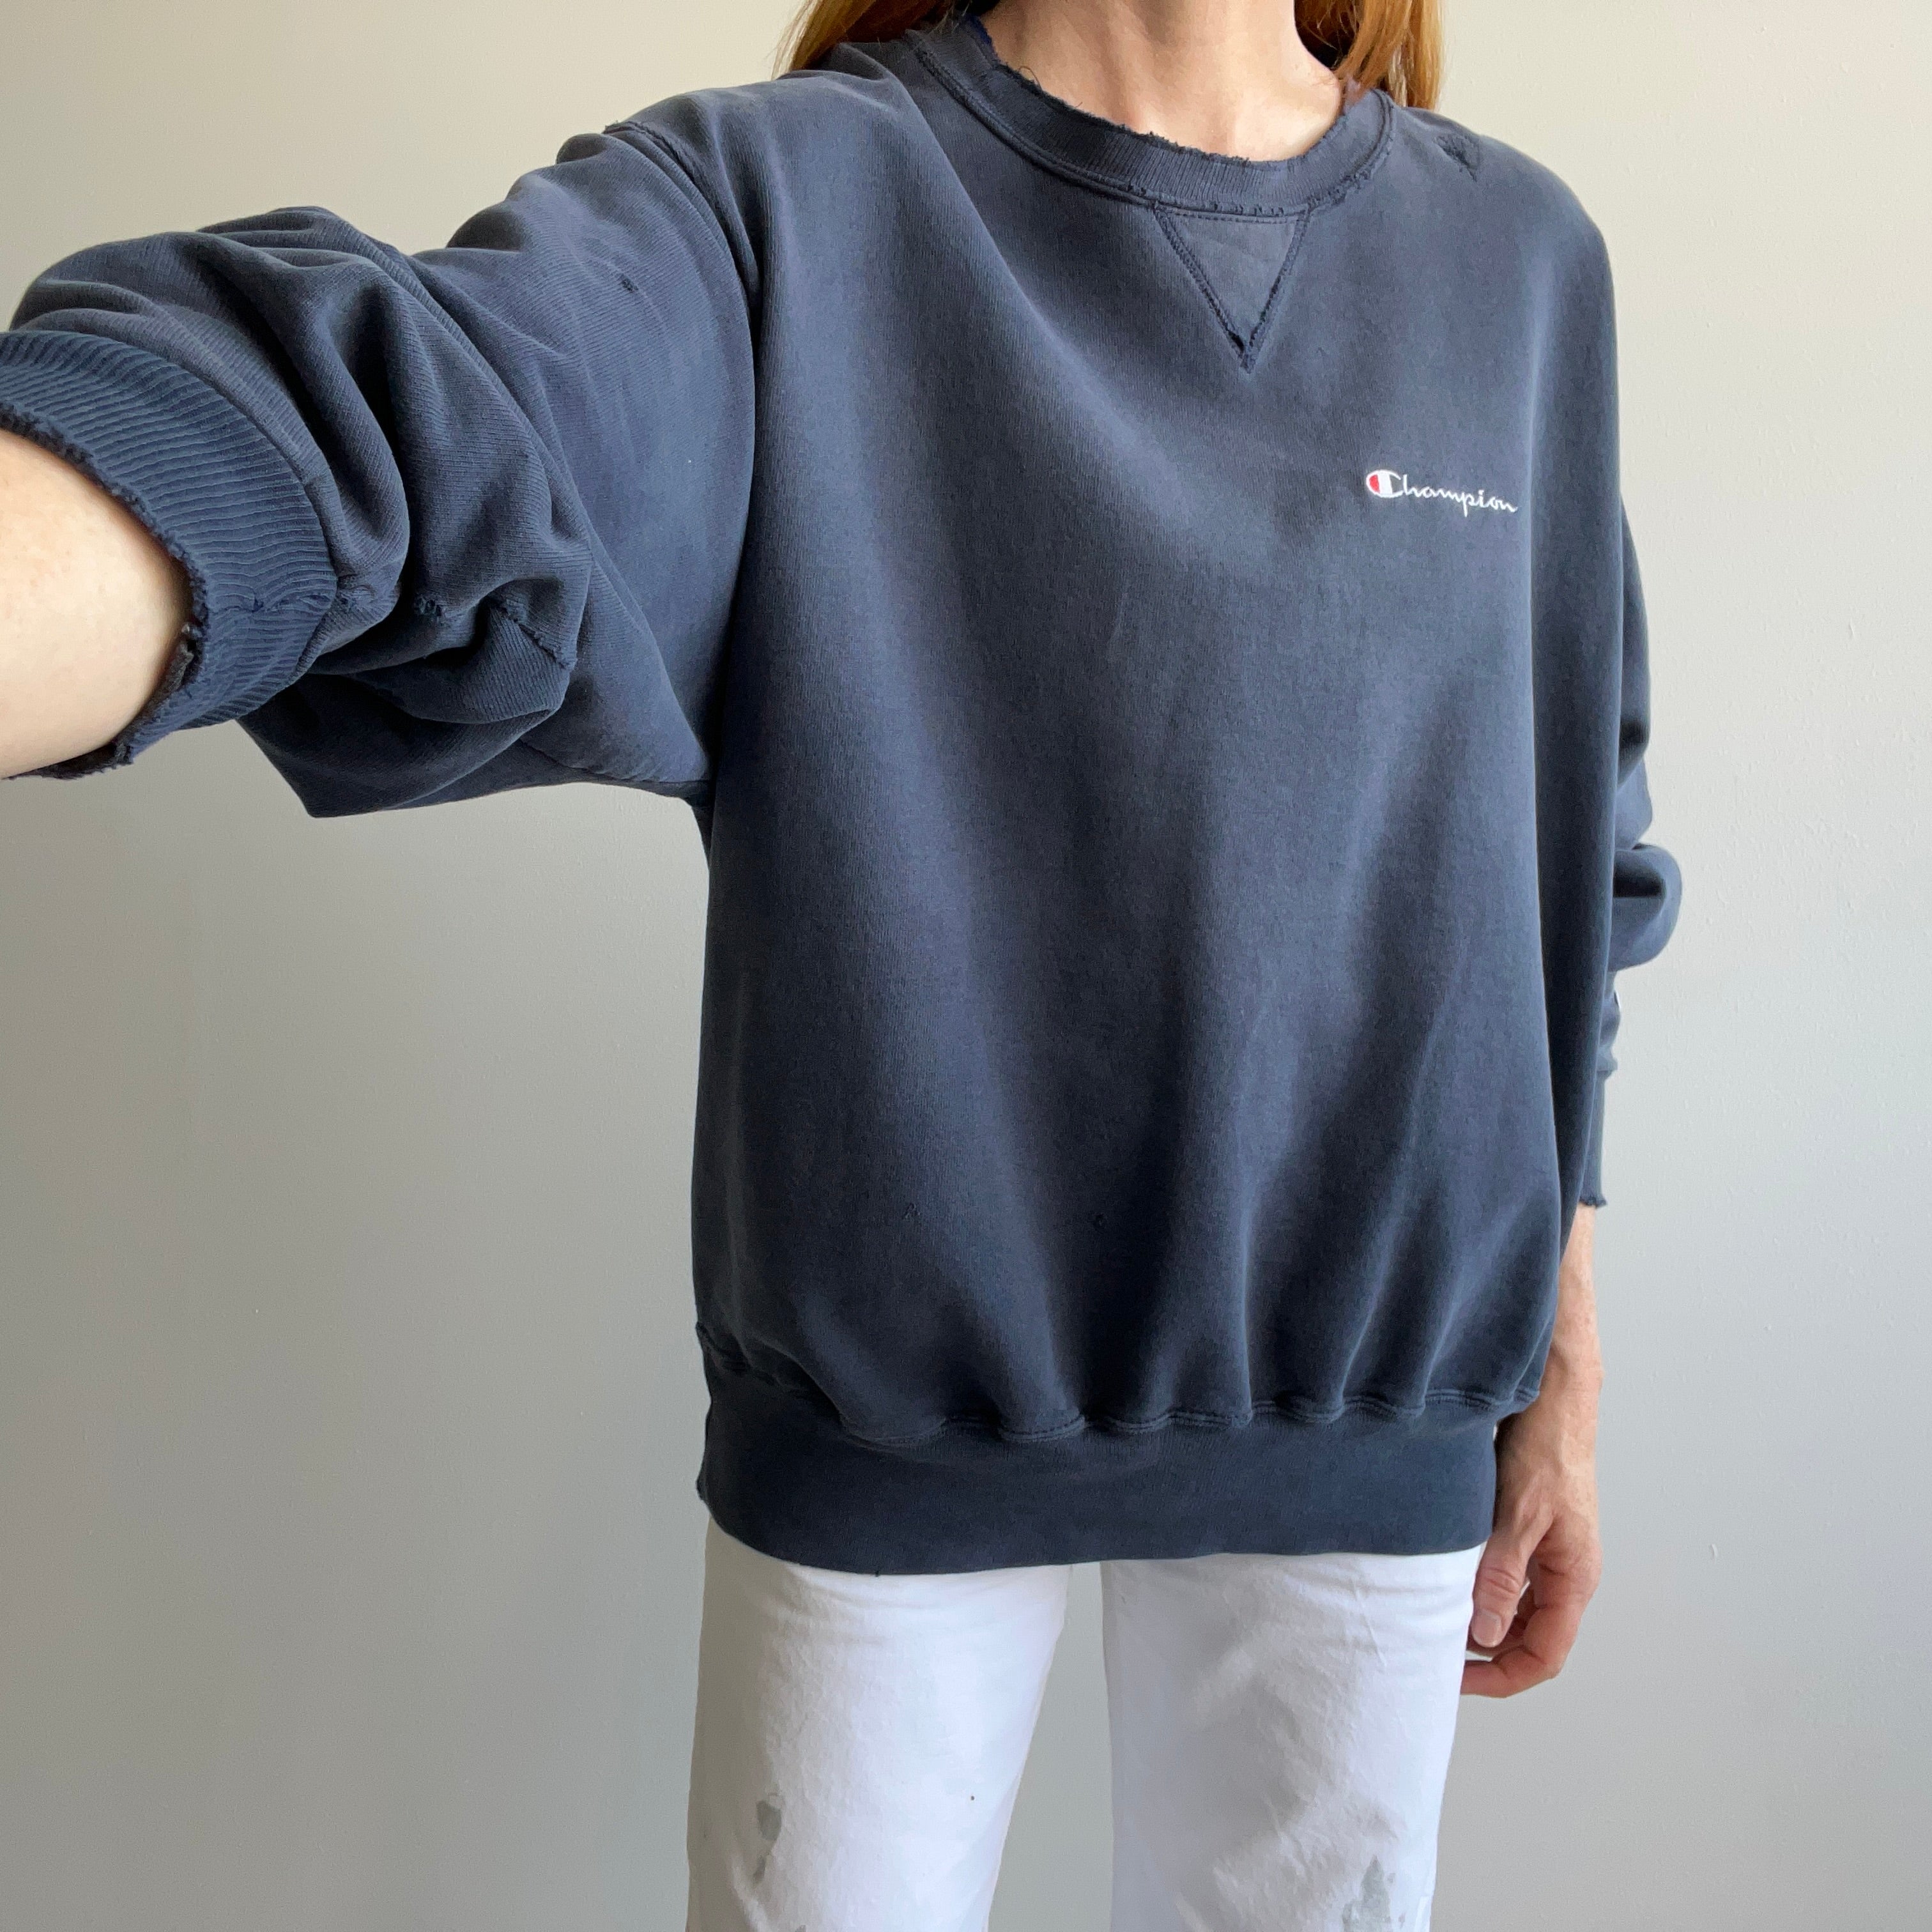 1990/2000s Mended Beyond Faded Tattered and Worn Champion Sweatshirt